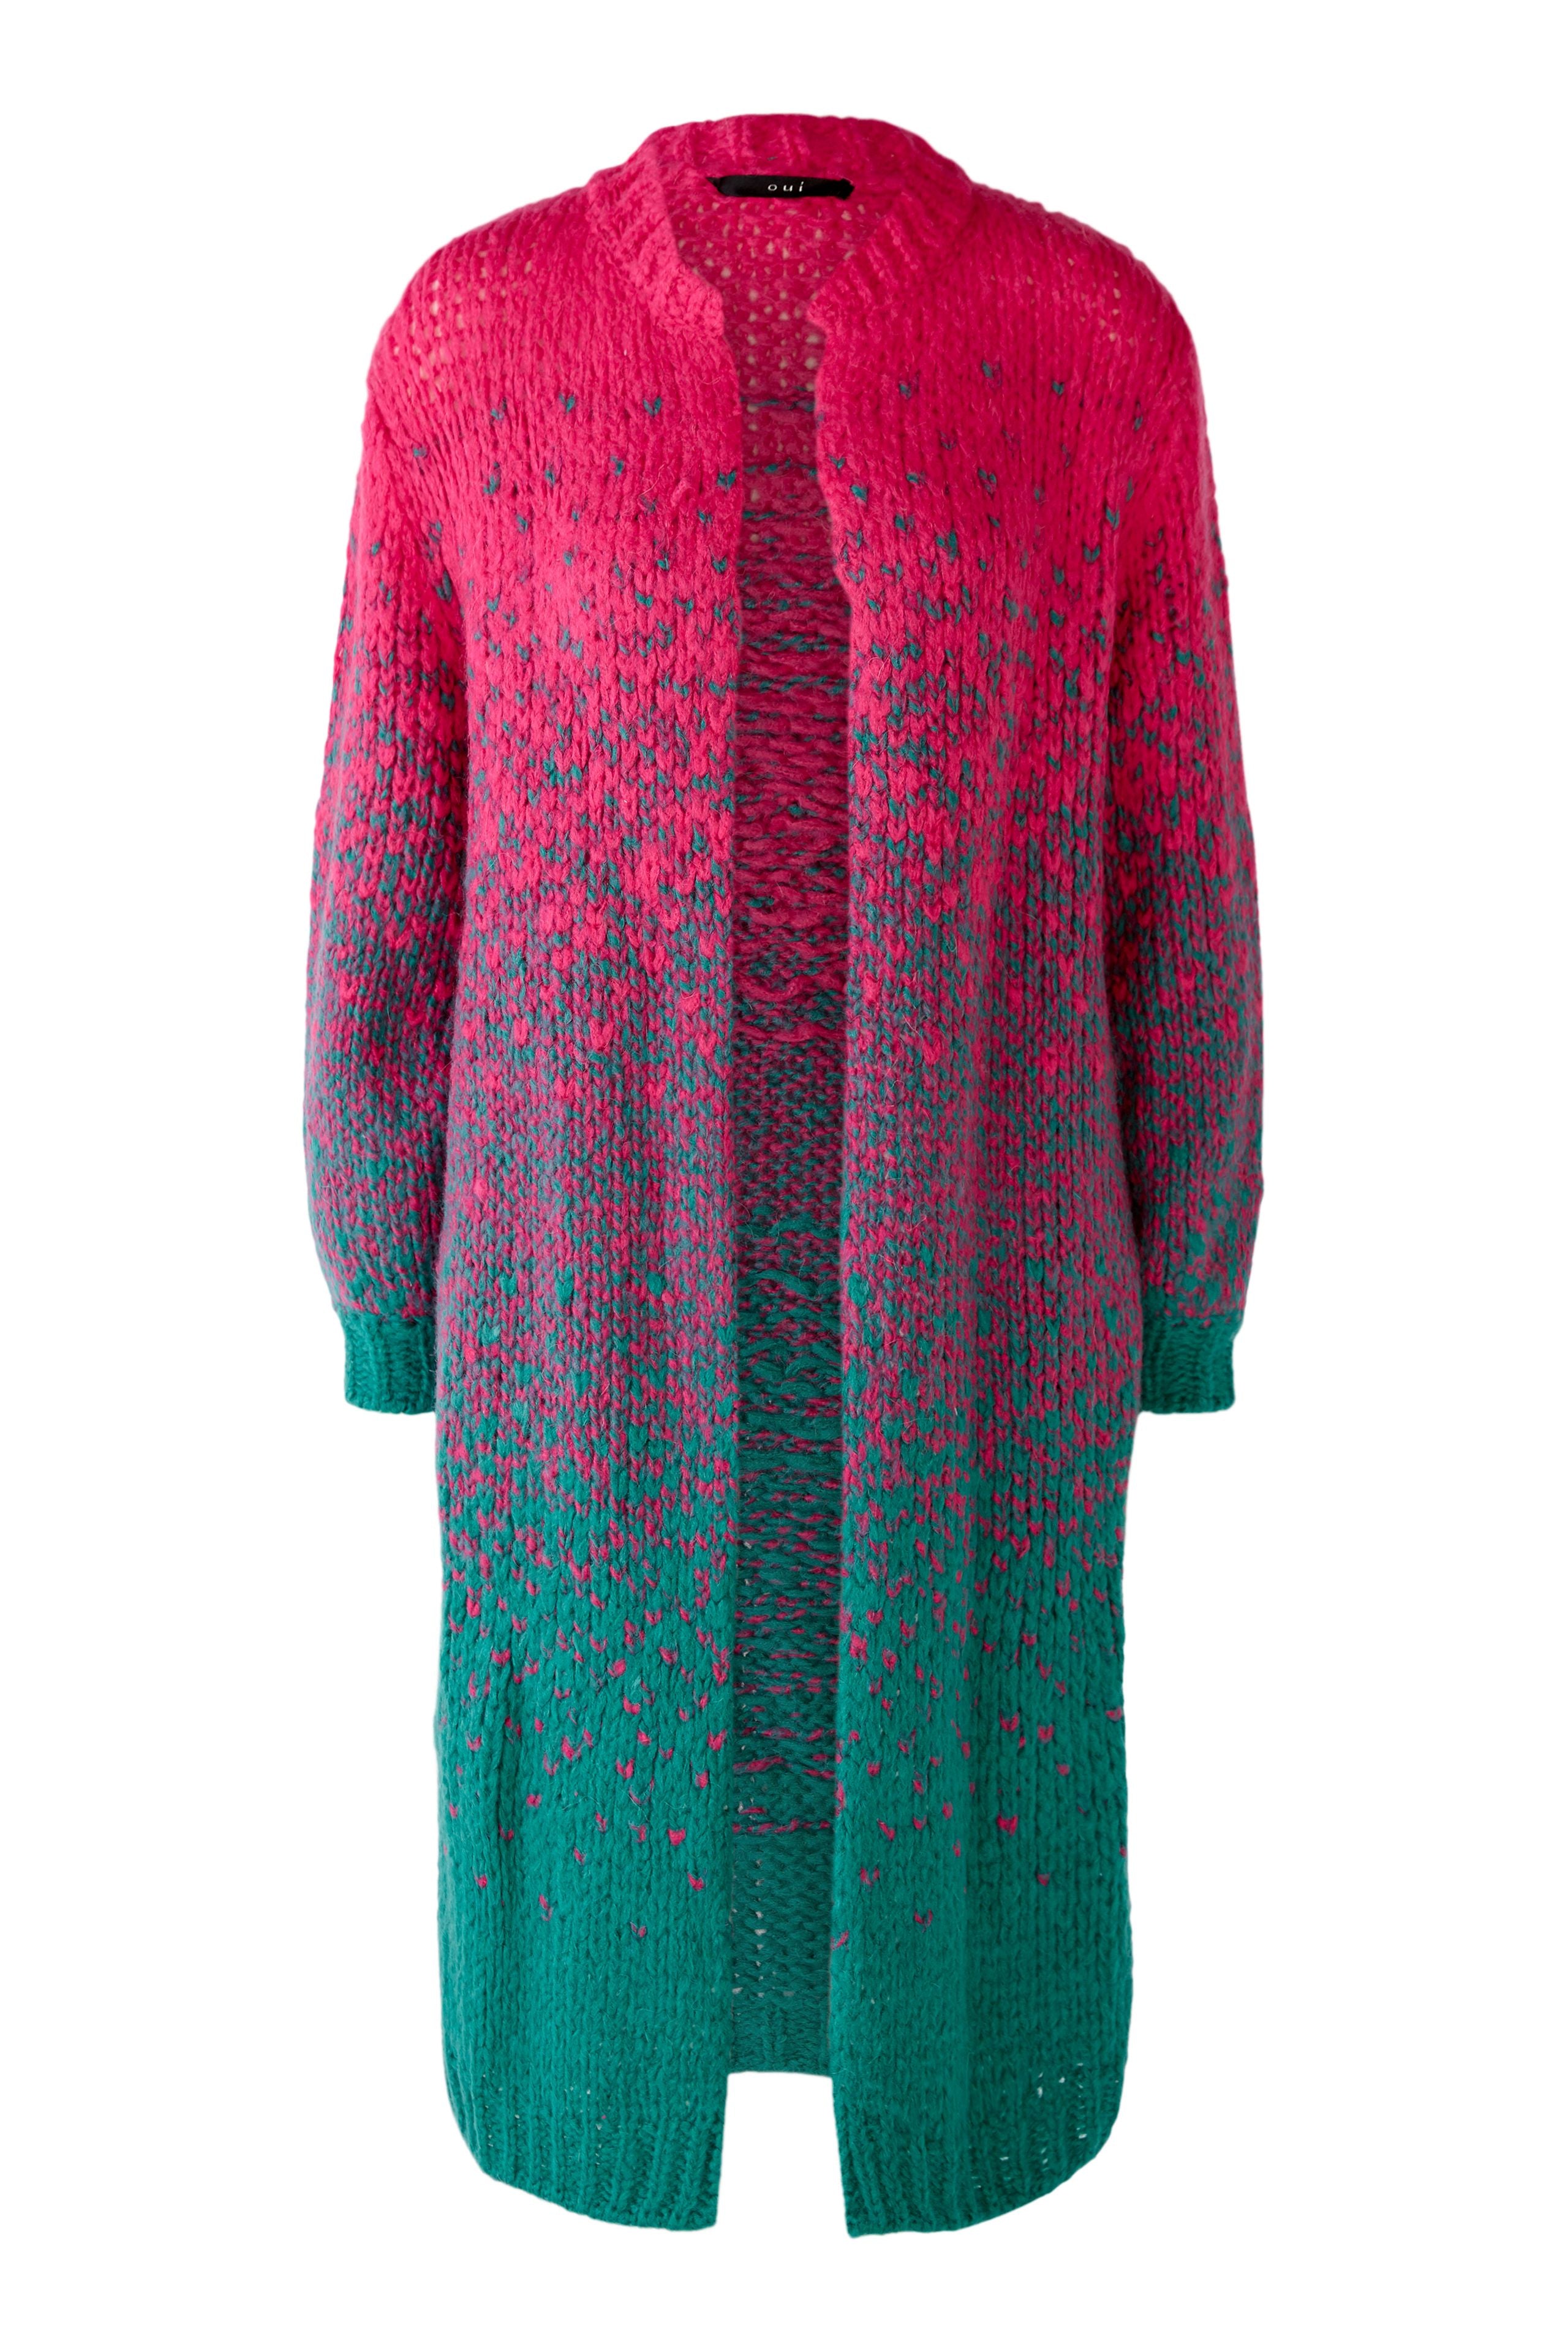 OUI PINK AND GREEN LONG CARDIGAN 79449 223